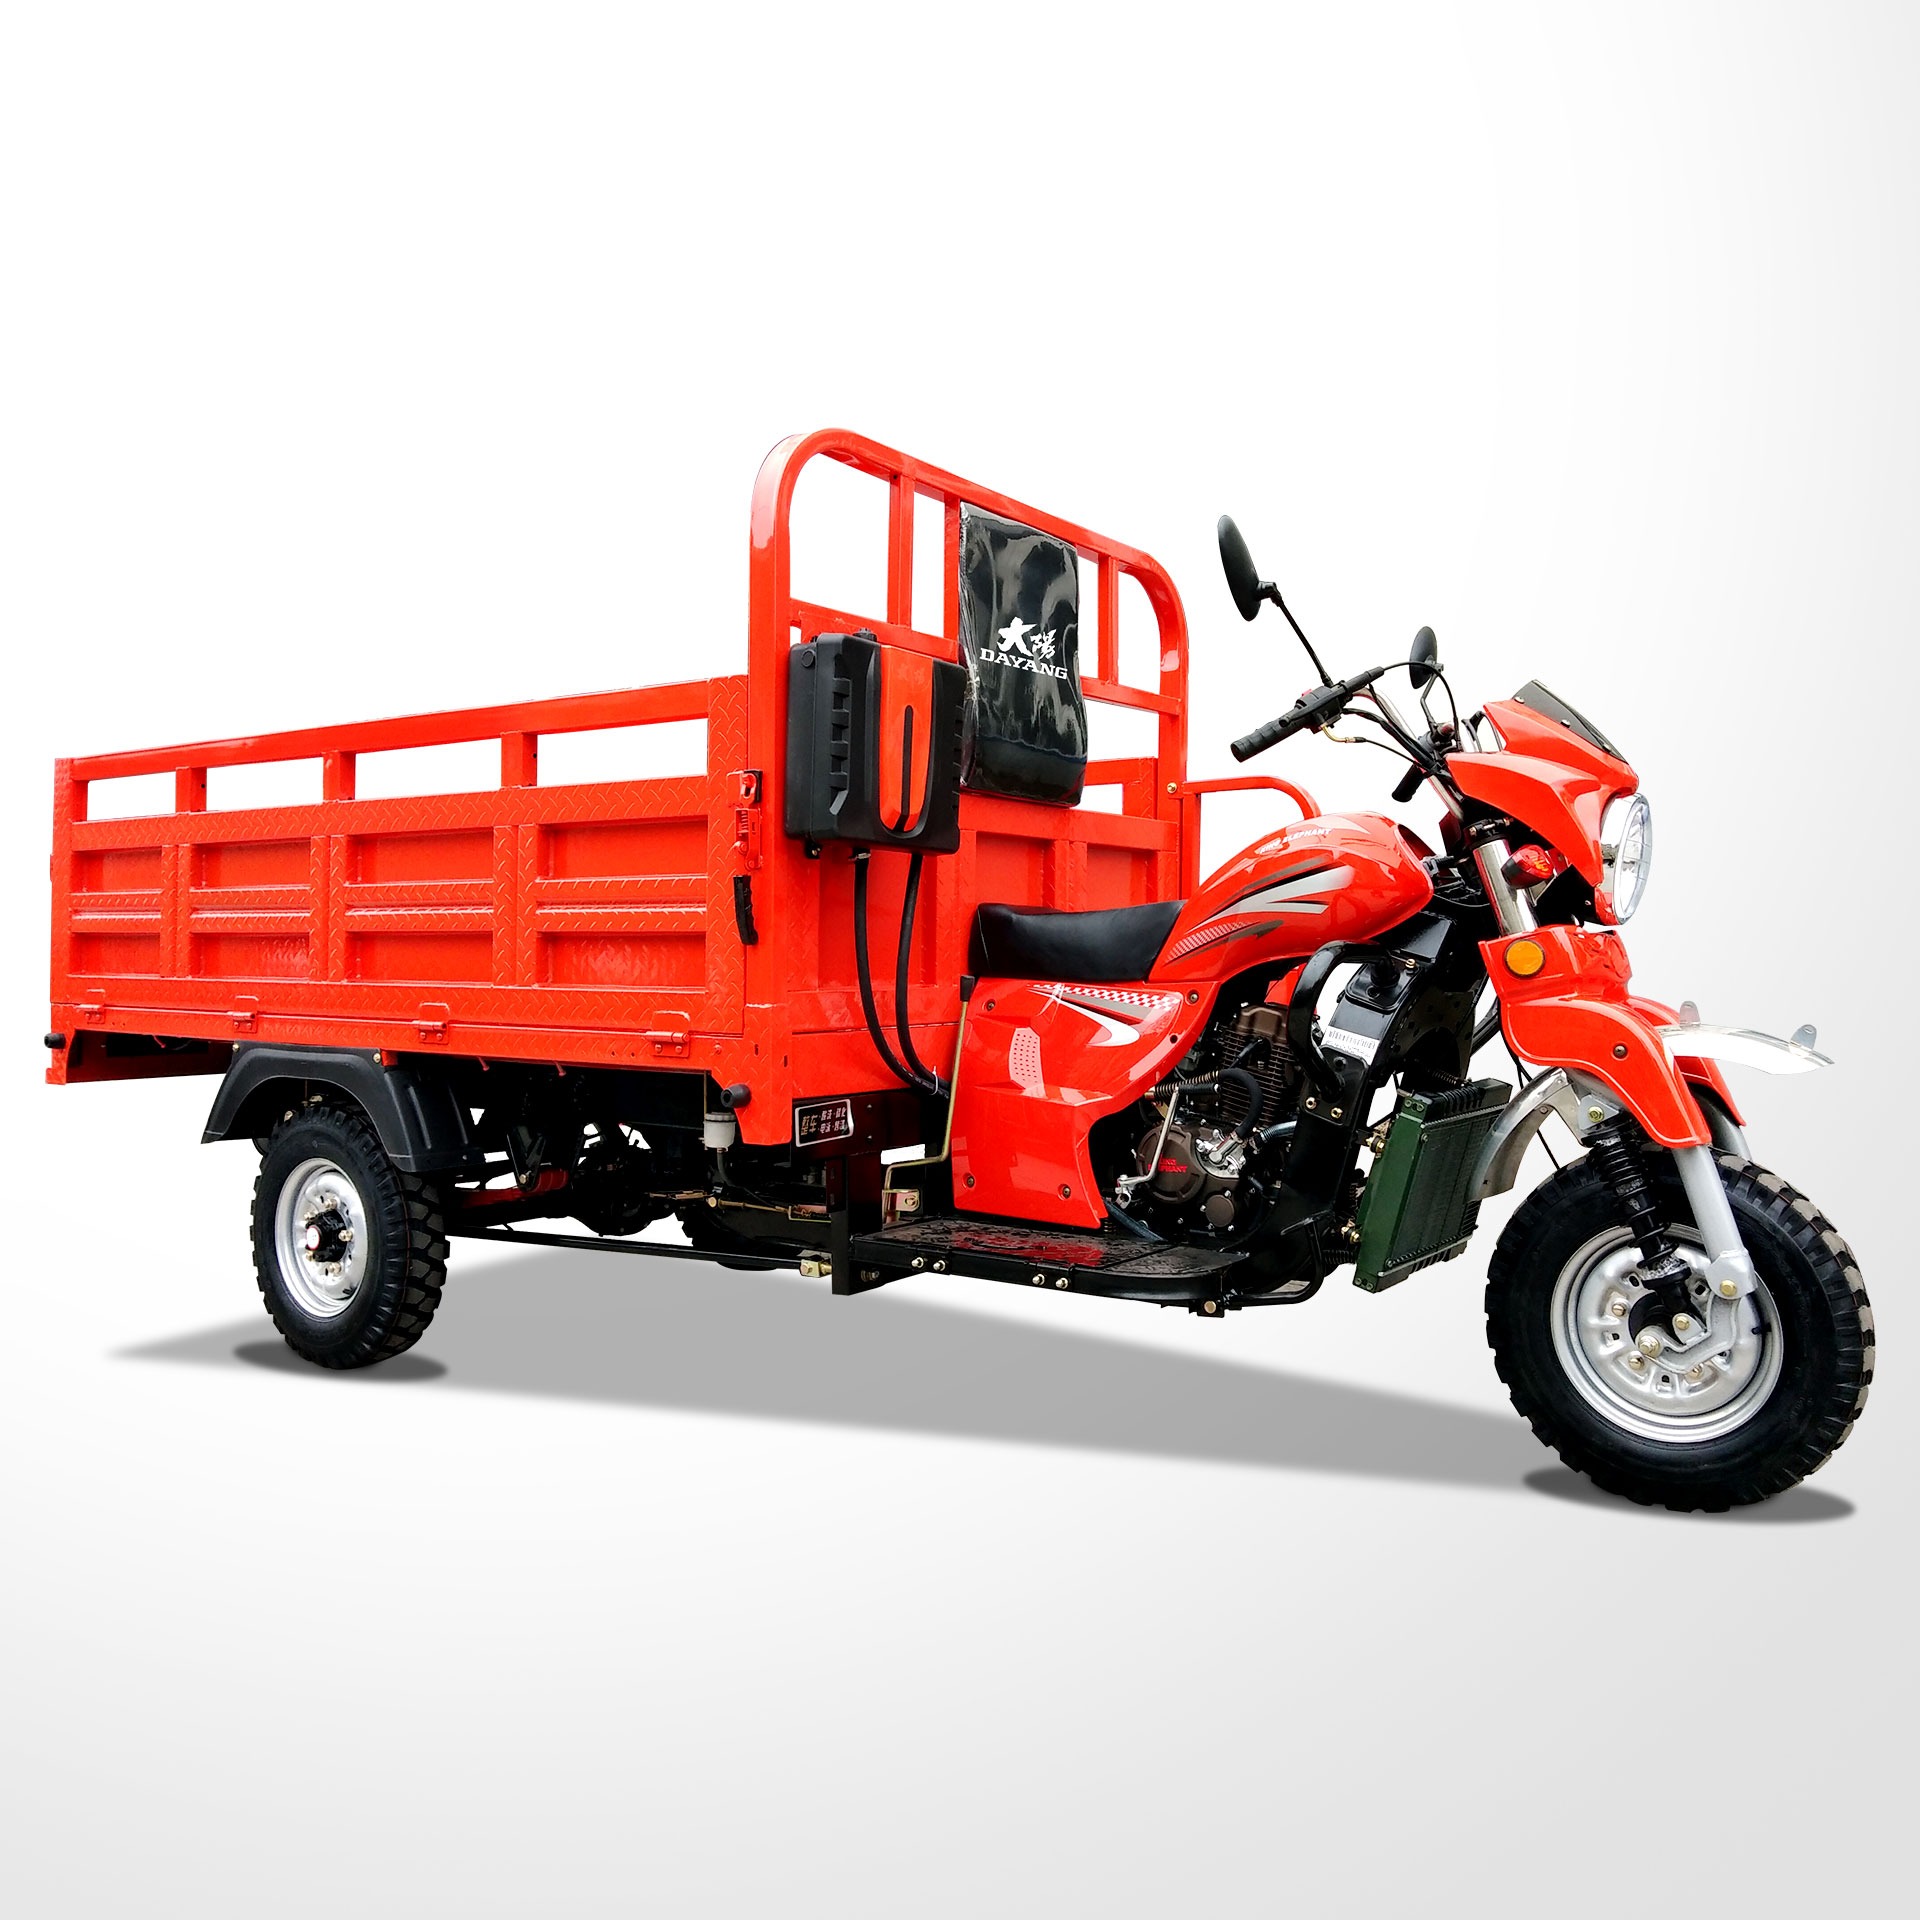 Wholesale cheapest brand new agricultural imported Lifan 250cc engine dukar tricycle cargo bike tricycle